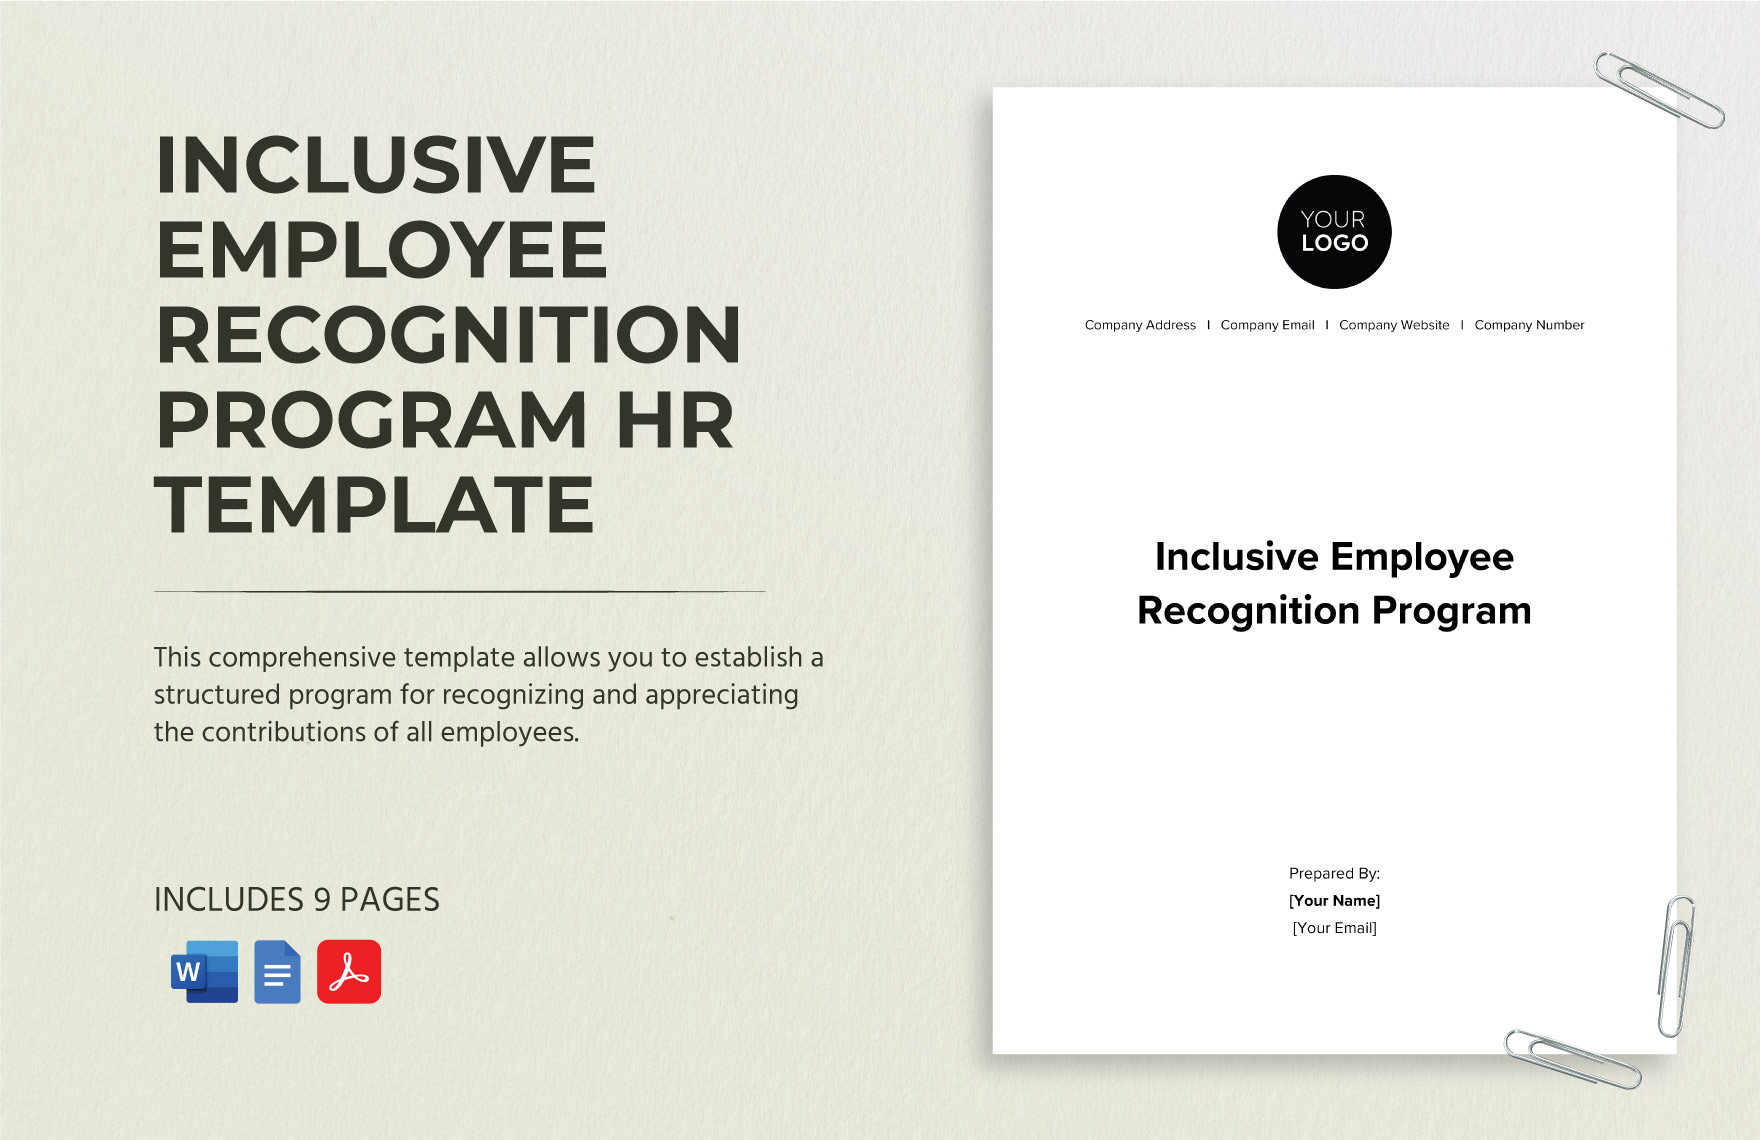 Inclusive Employee Recognition Program HR Template in Word, Google Docs, PDF